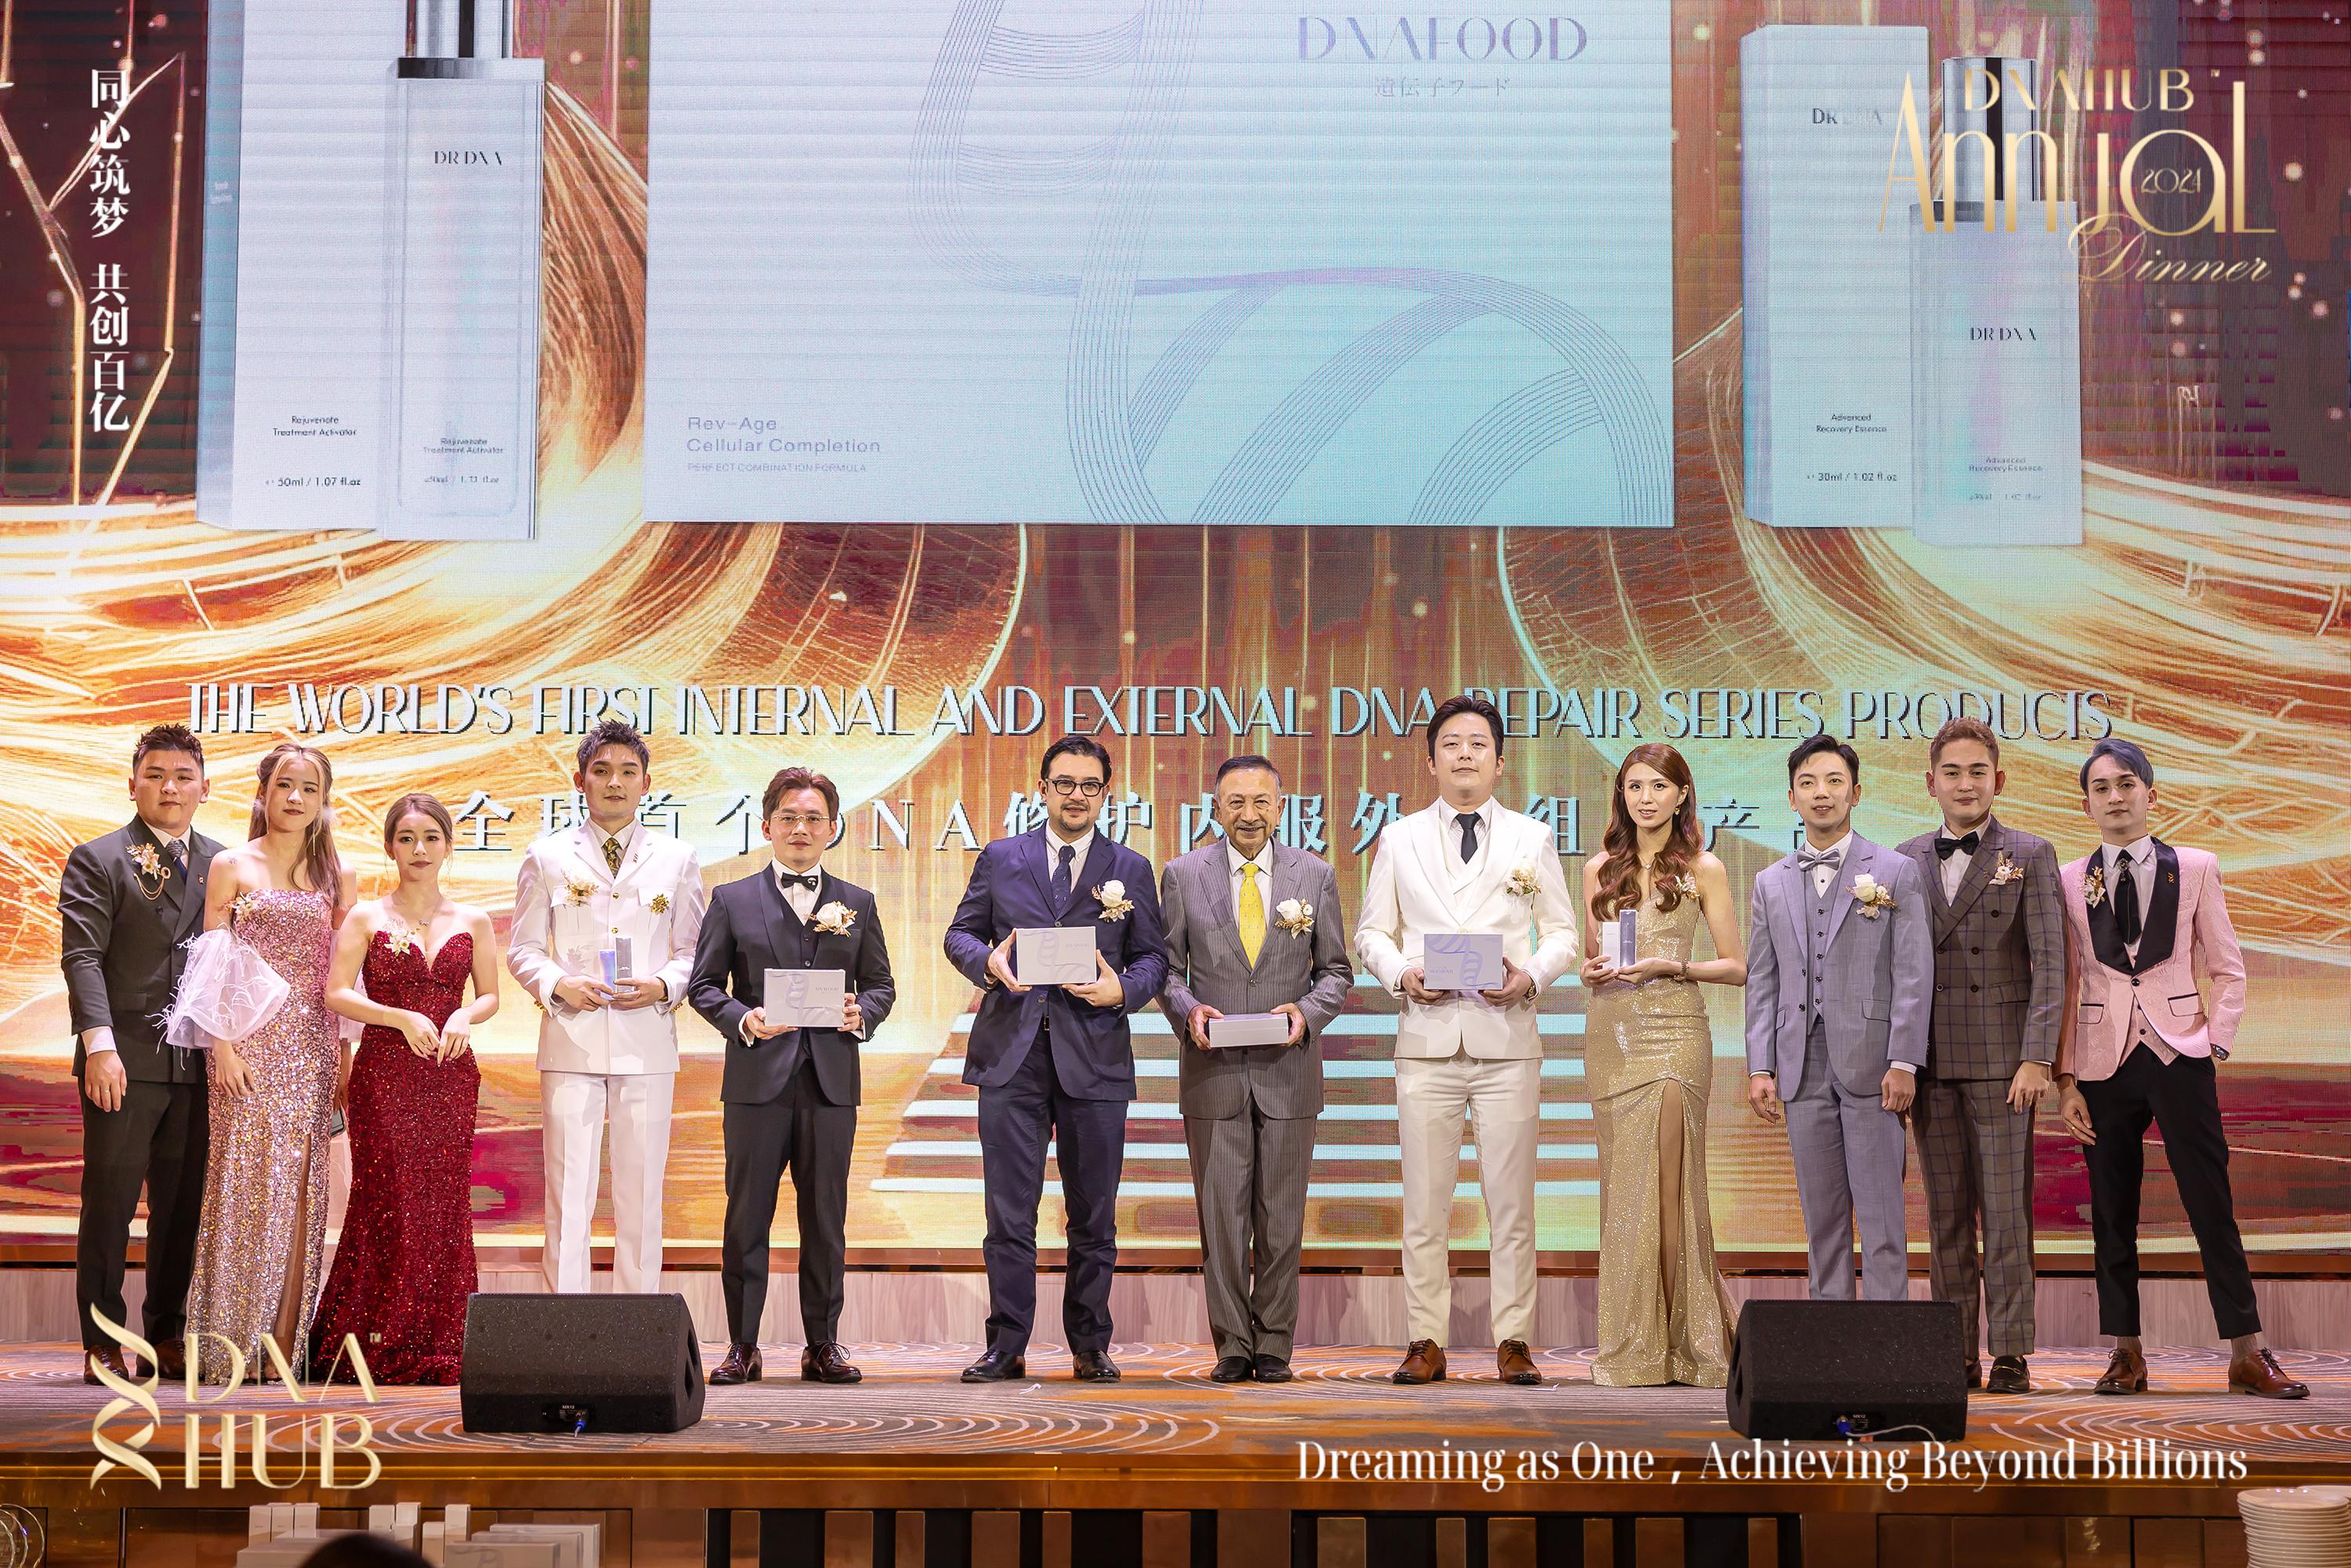 [BUSINESS] DNAHUB Annual Dinner 2024 | Dreaming As One . Achieving Beyond Billions